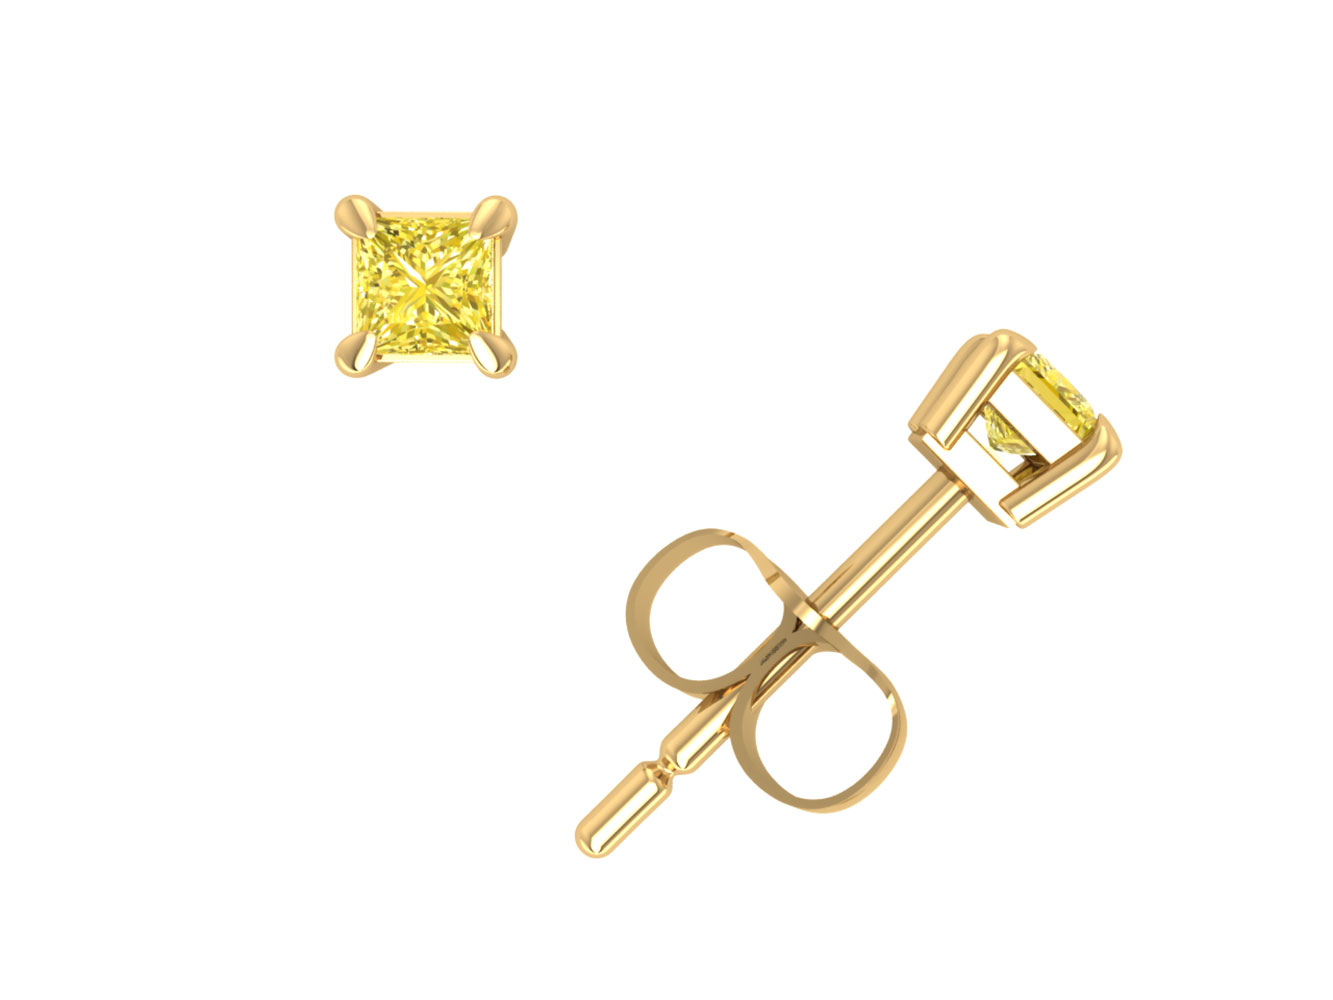 Jewel We Sell 0.15Carat Princess Cut Yellow Diamond Solitaire Stud Earrings 14k White or Yellow Gold Prong Set I2